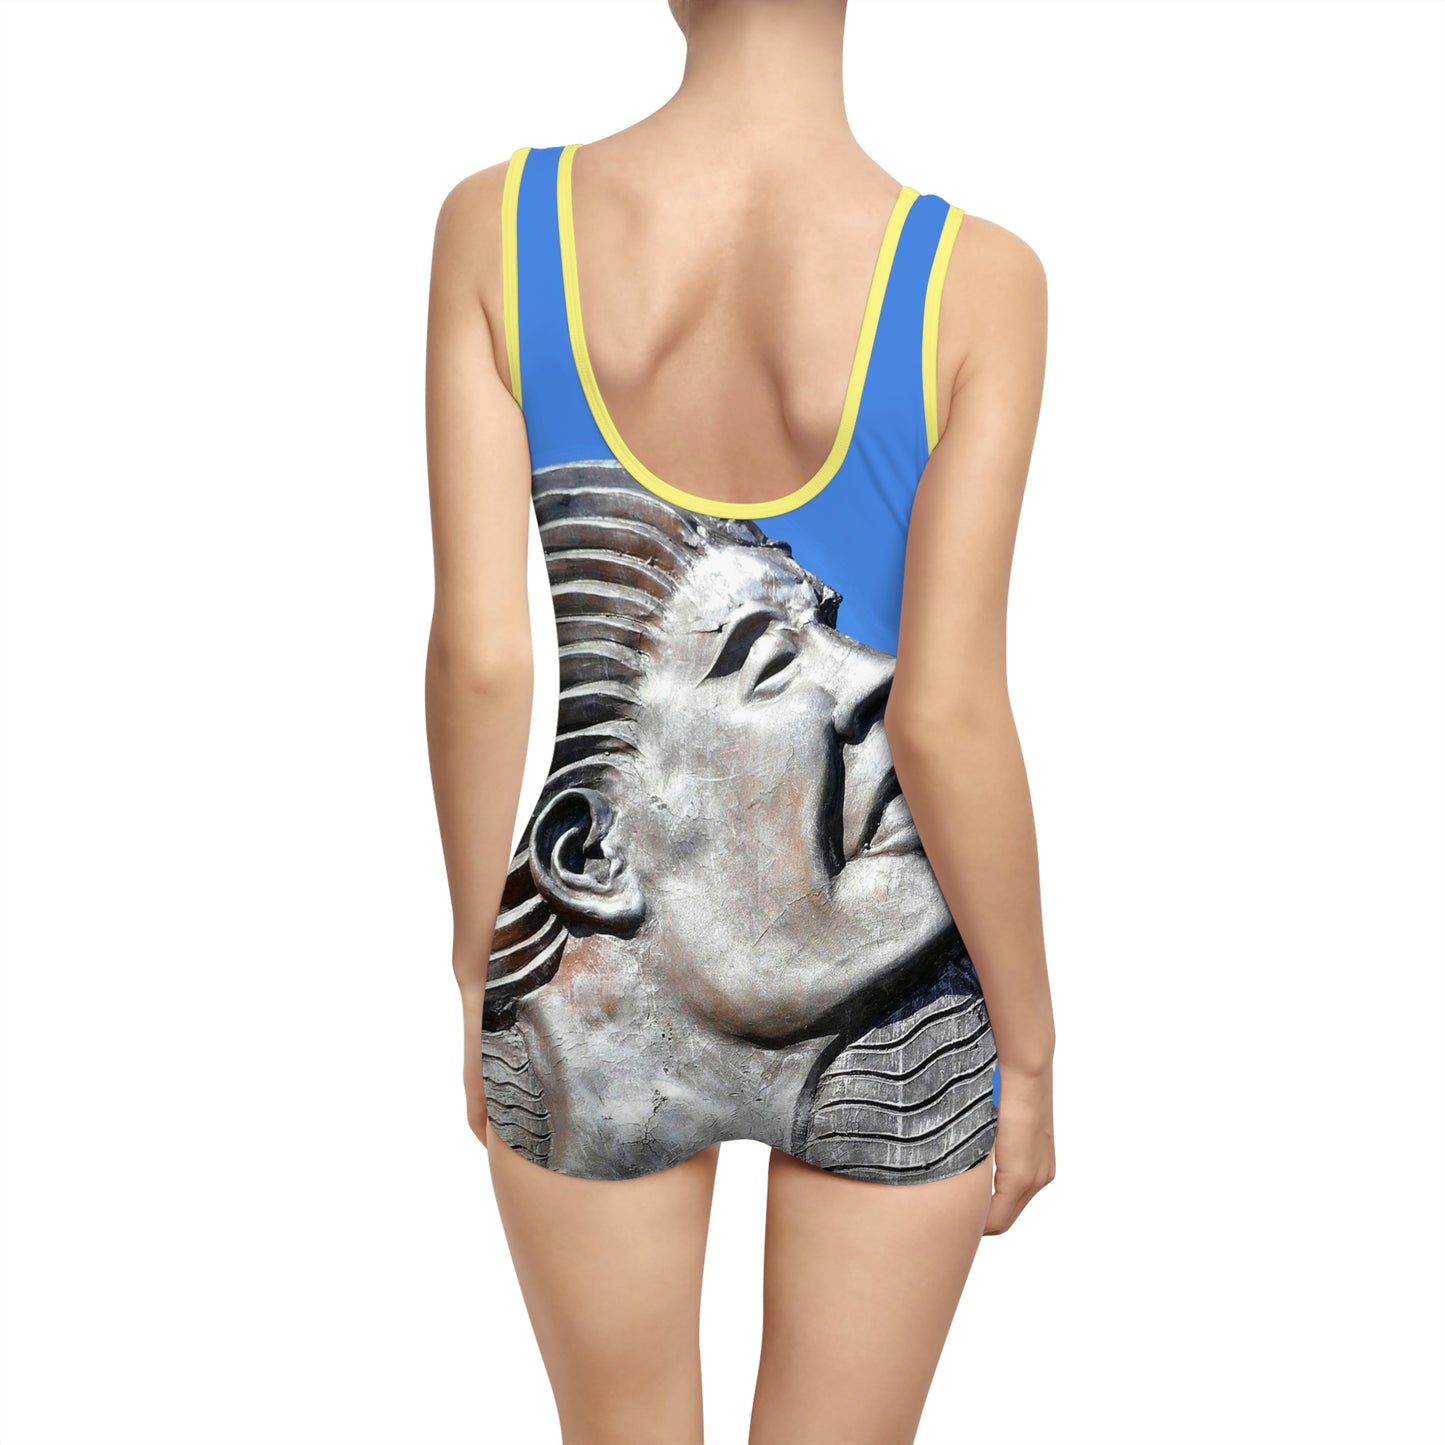 Nymph Beauty - Women's Vintage Swimsuit - Fry1Productions